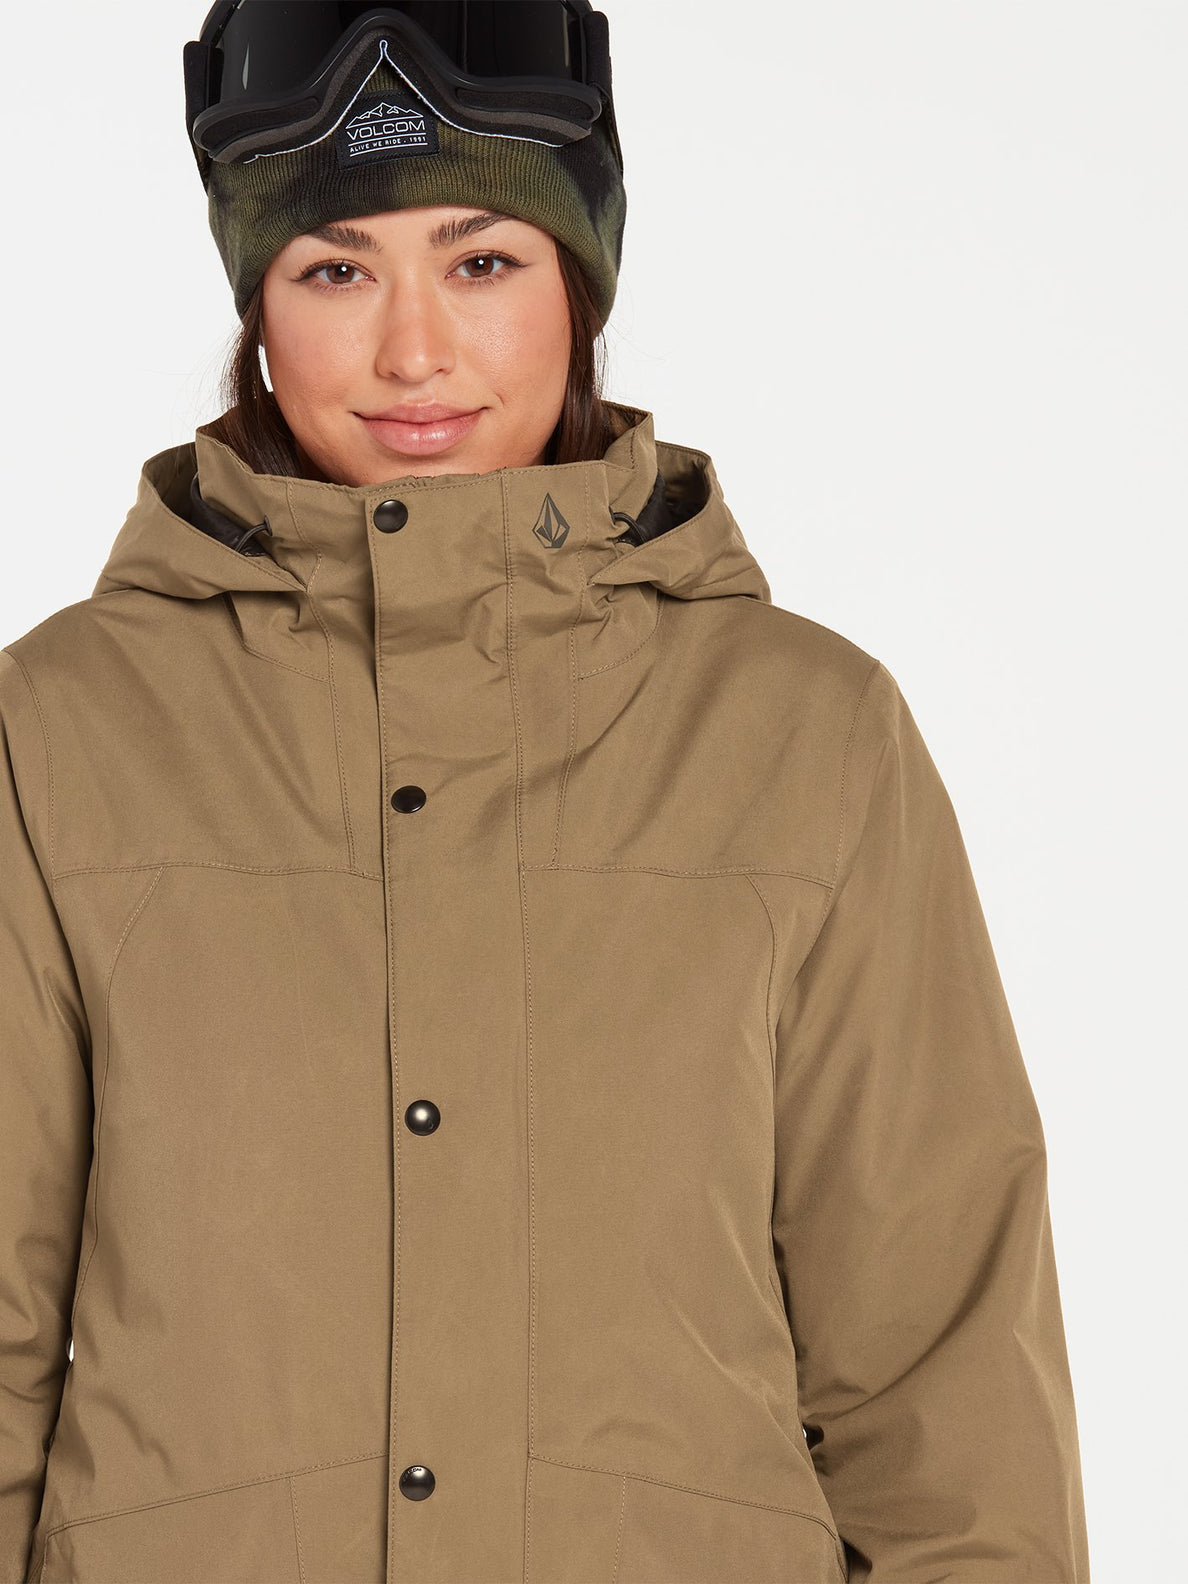 Ell Insulated Gore-Tex Jacket - COFFEE (H0452203_COF) [23]